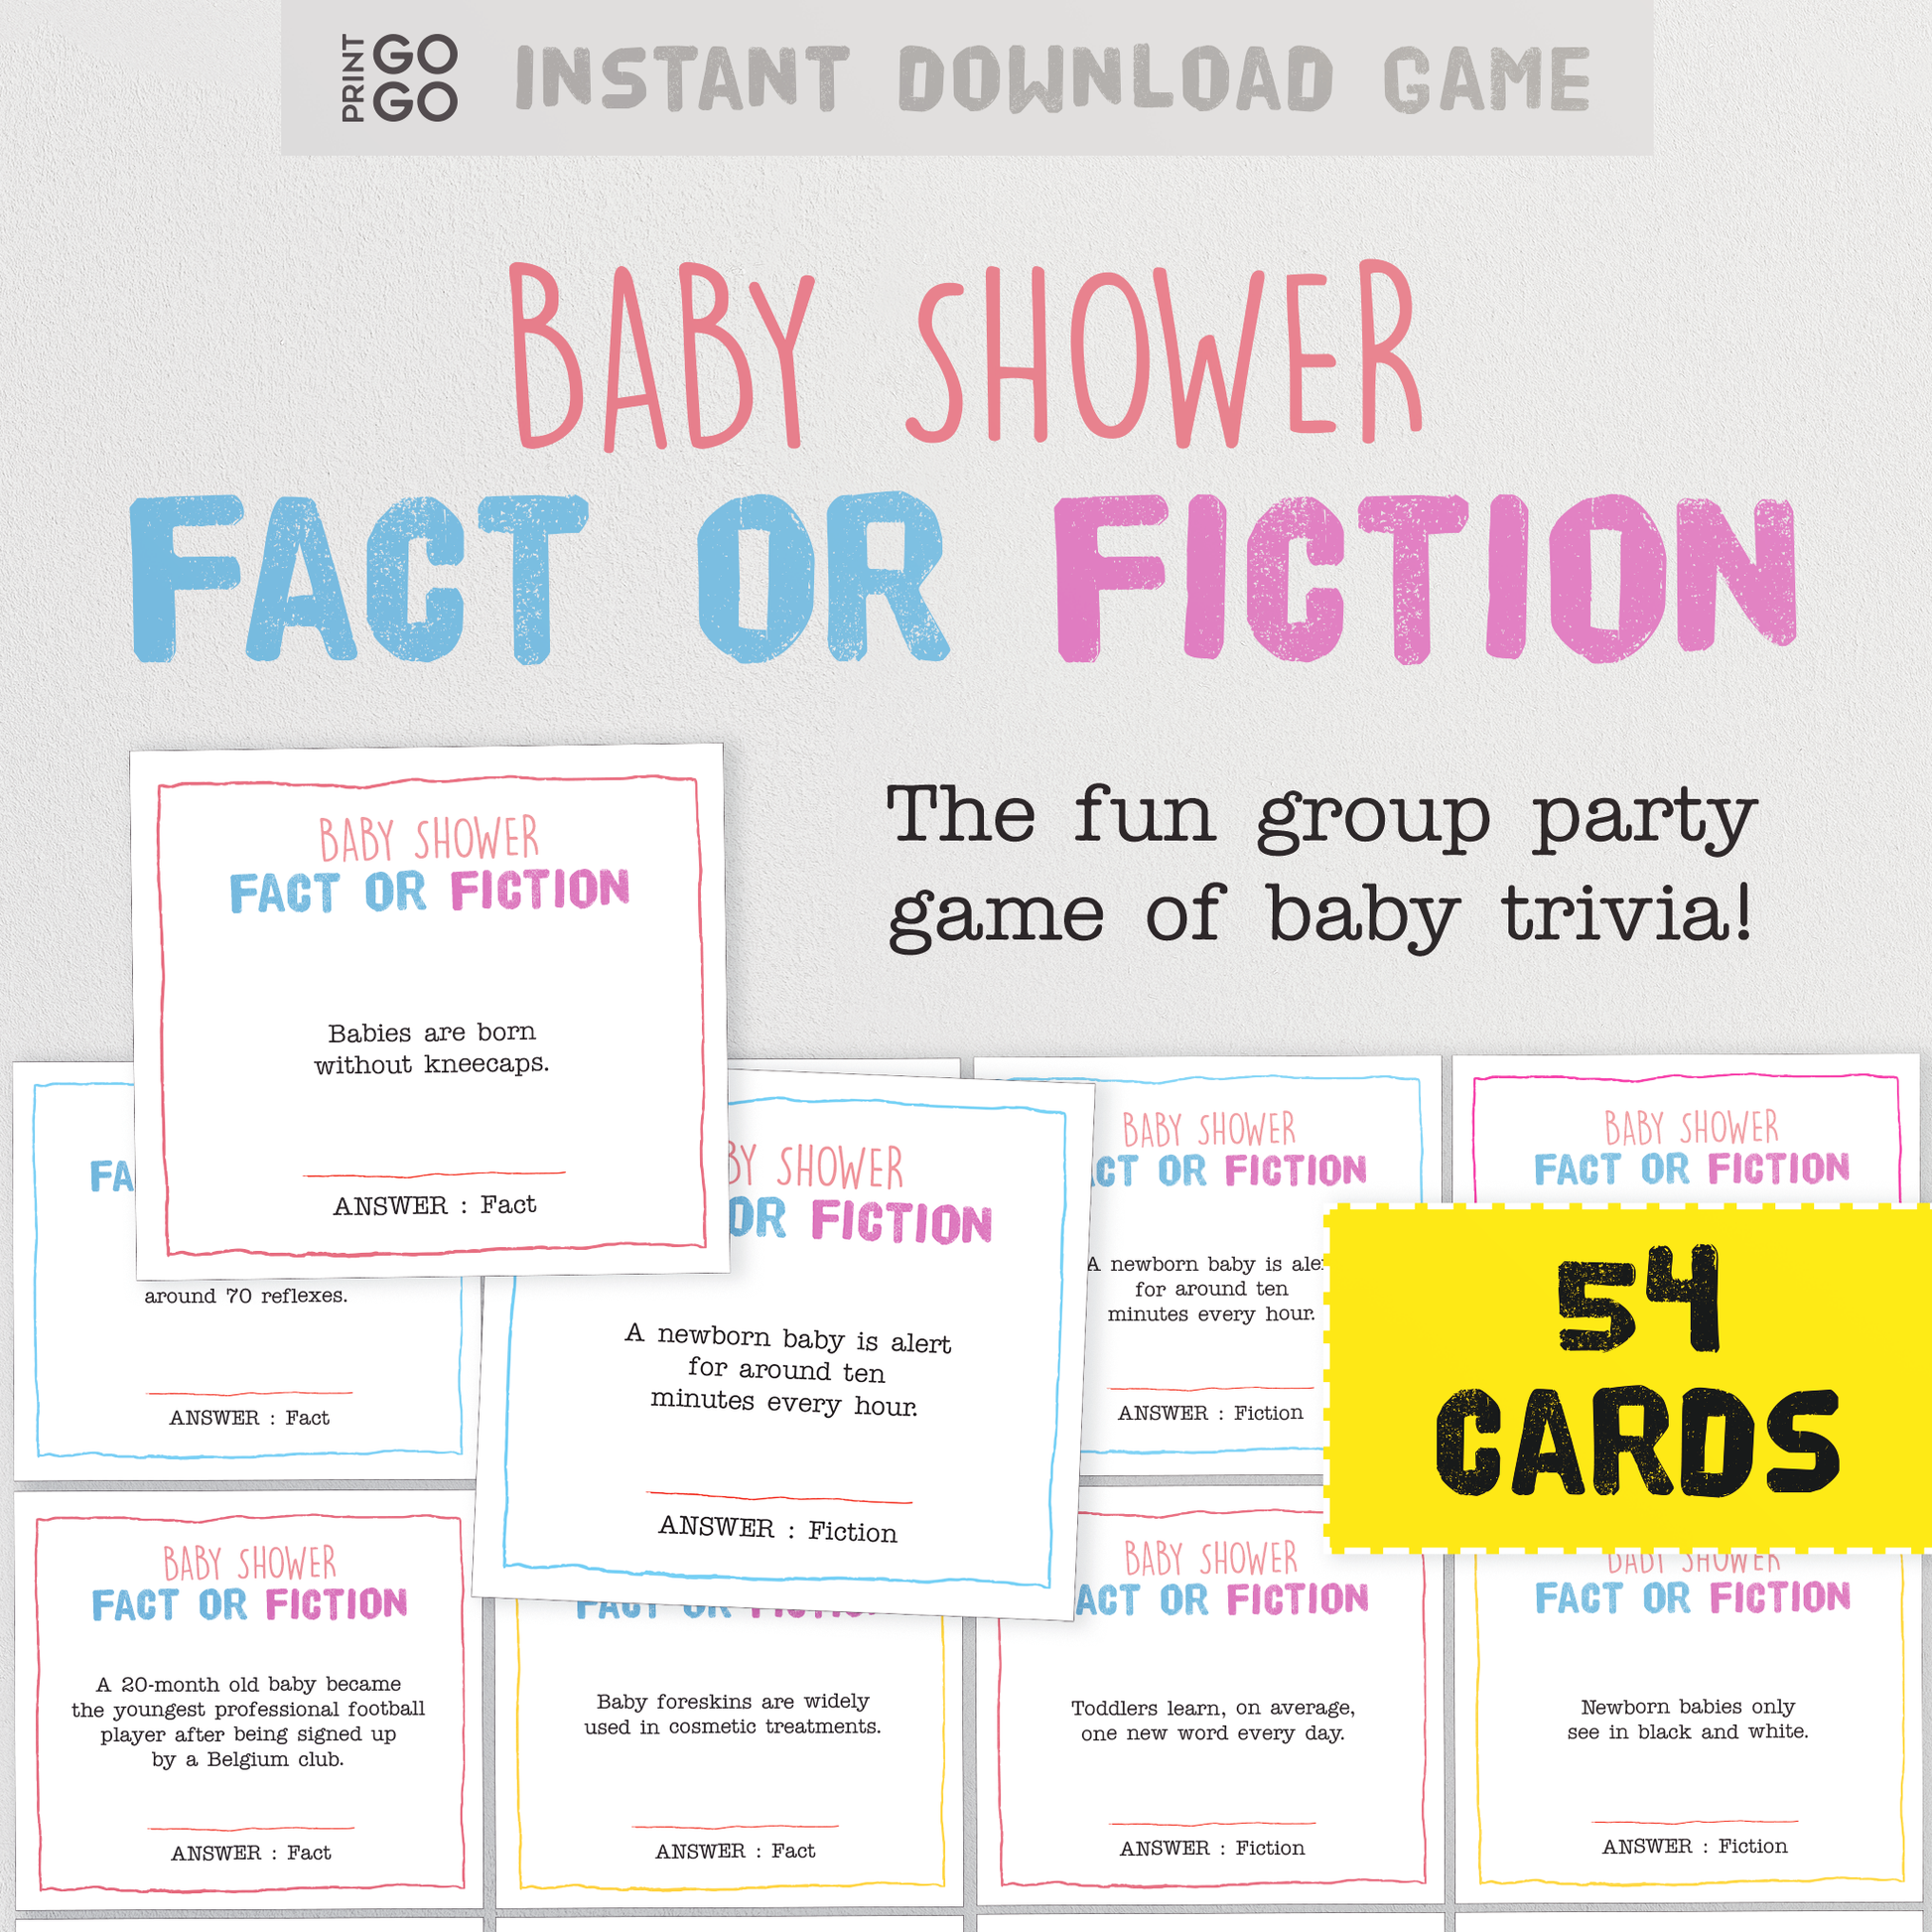 Baby Shower Fact or Fiction - The Fun Group Party Game of Baby Trivia